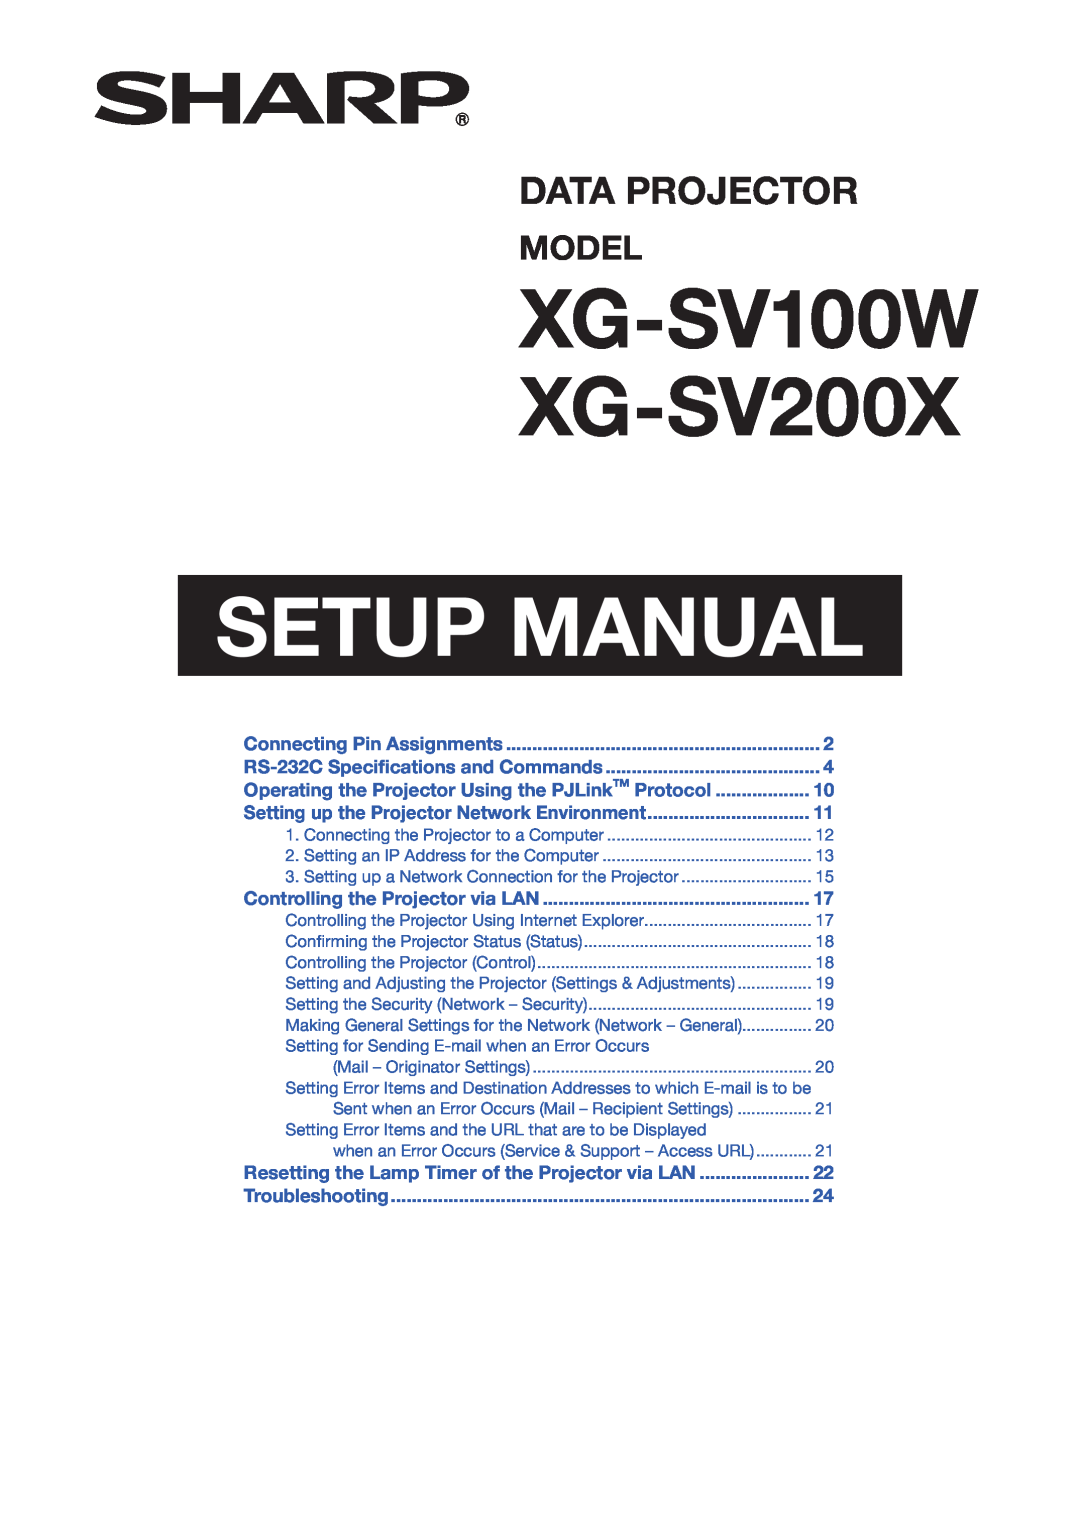 Sharp XG-SV100W appendix Model, Introduction, Easy Start, Connections, Operation, Basic, Features, Useful, Appendix, Setup 